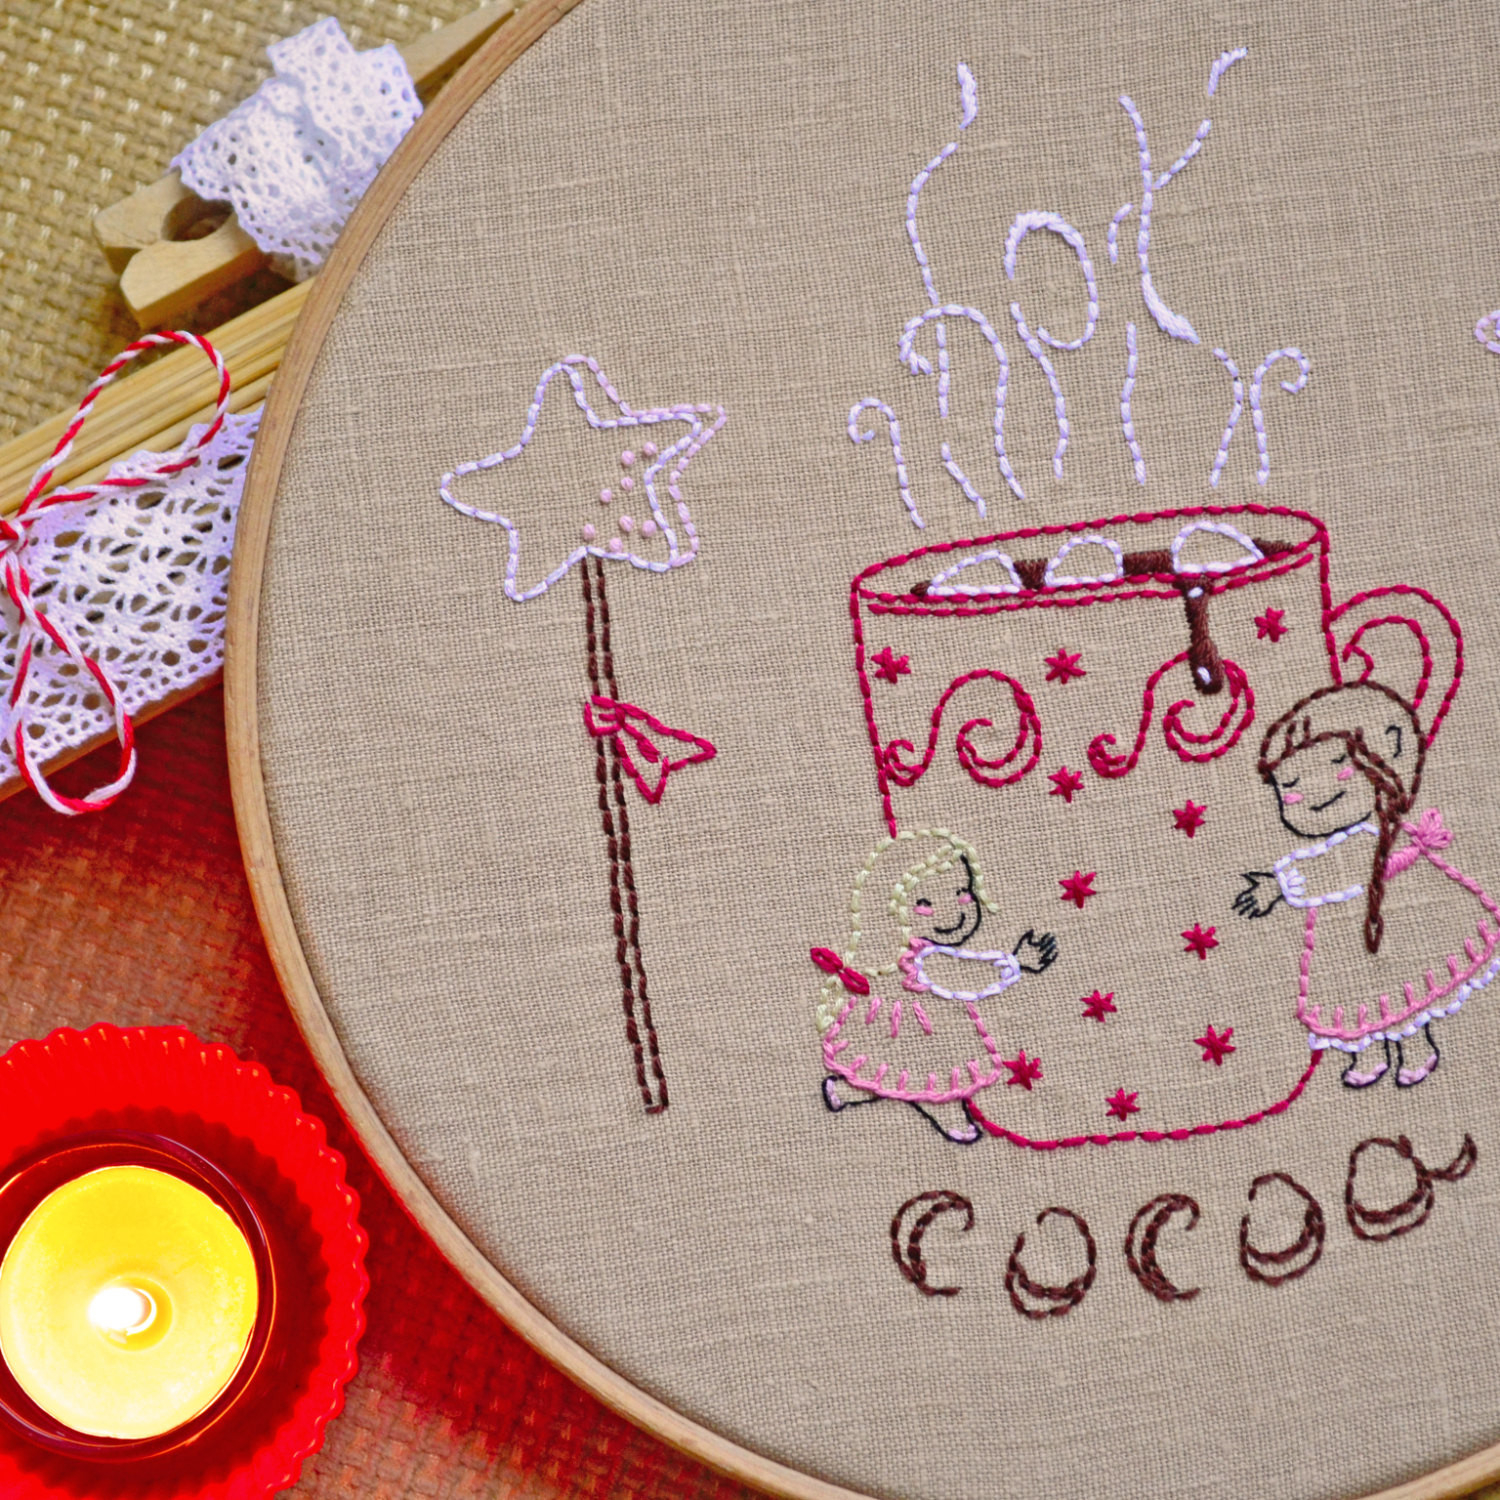 Diy Embroidery Patterns 32 Clever Modern Embroidery Diy Project Ideas That Will Replenish